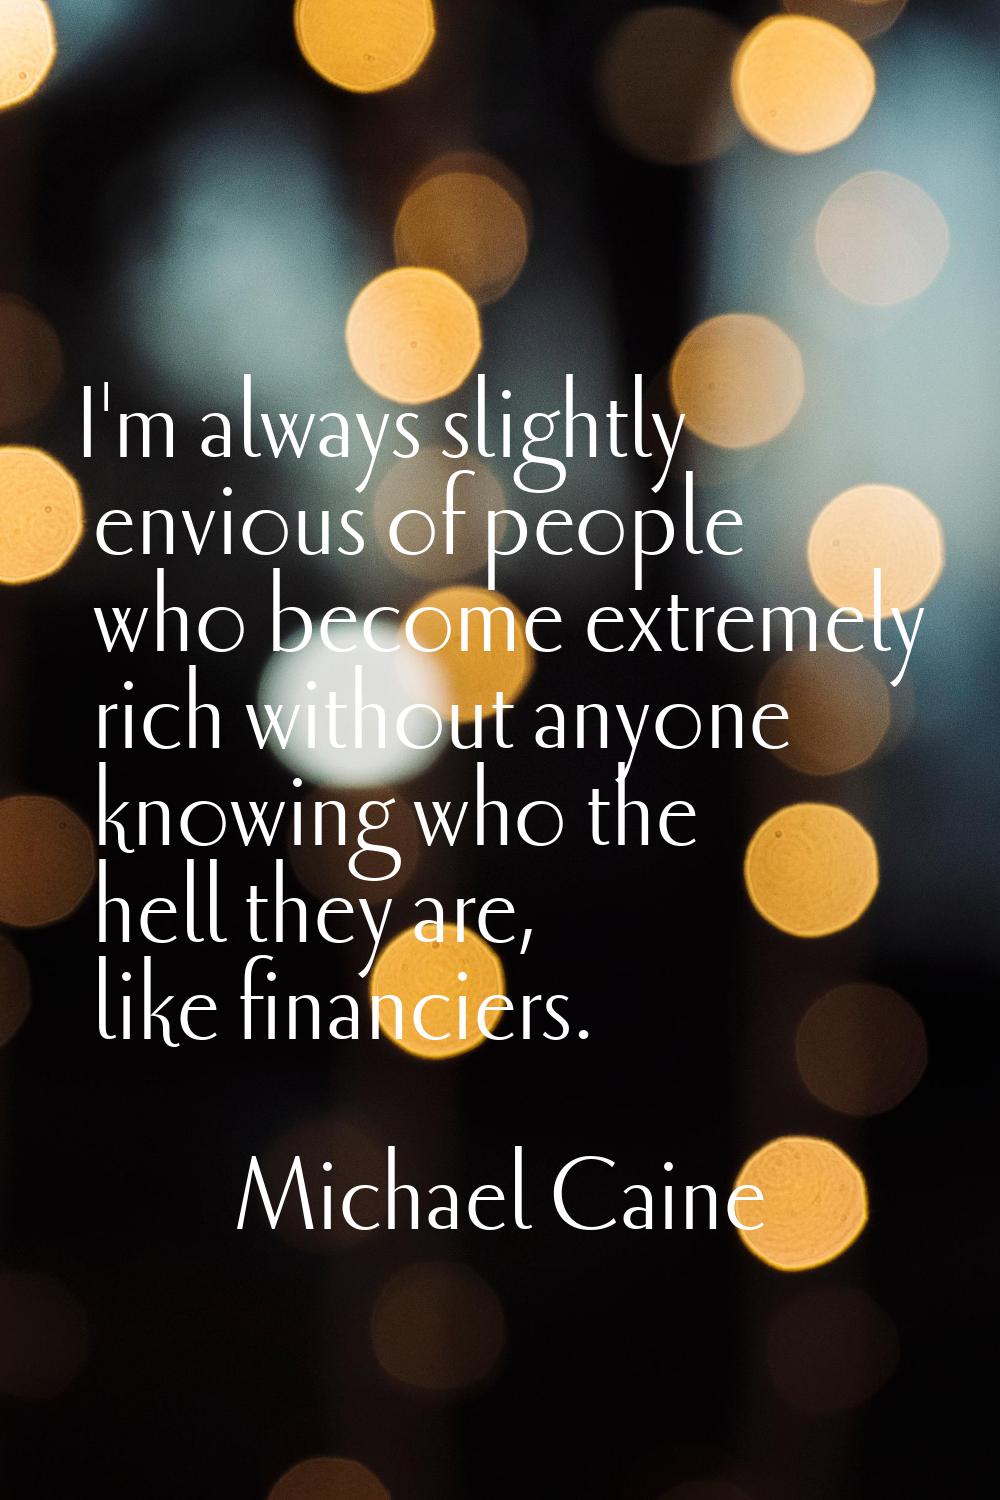 I'm always slightly envious of people who become extremely rich without anyone knowing who the hell